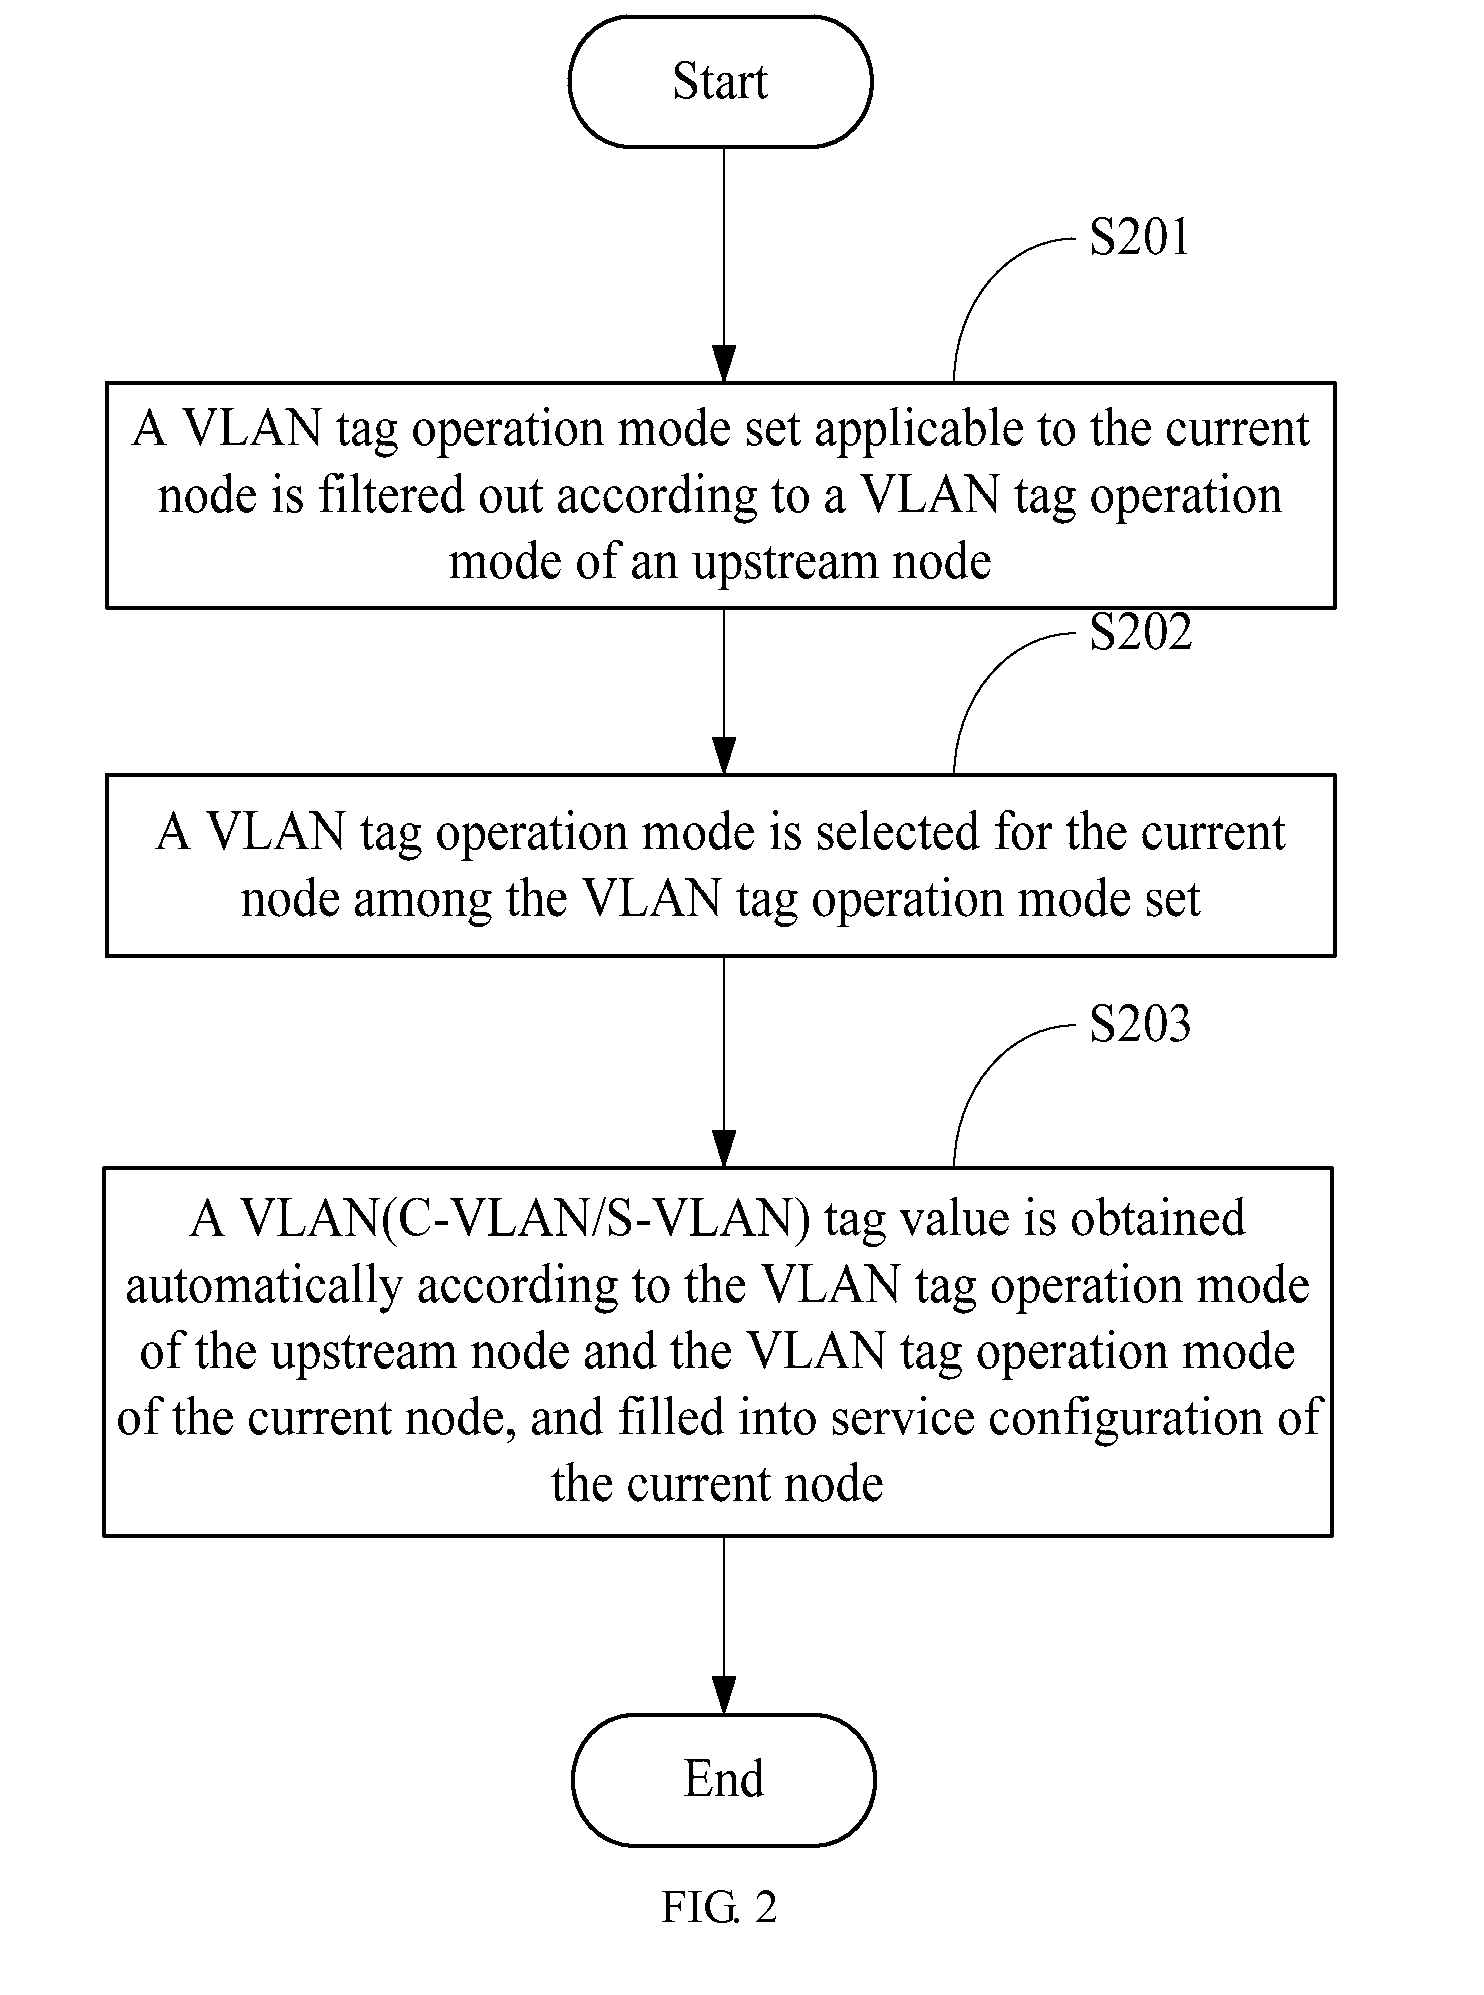 Method and apparatus for distributing end-to-end qinq service tags automatically